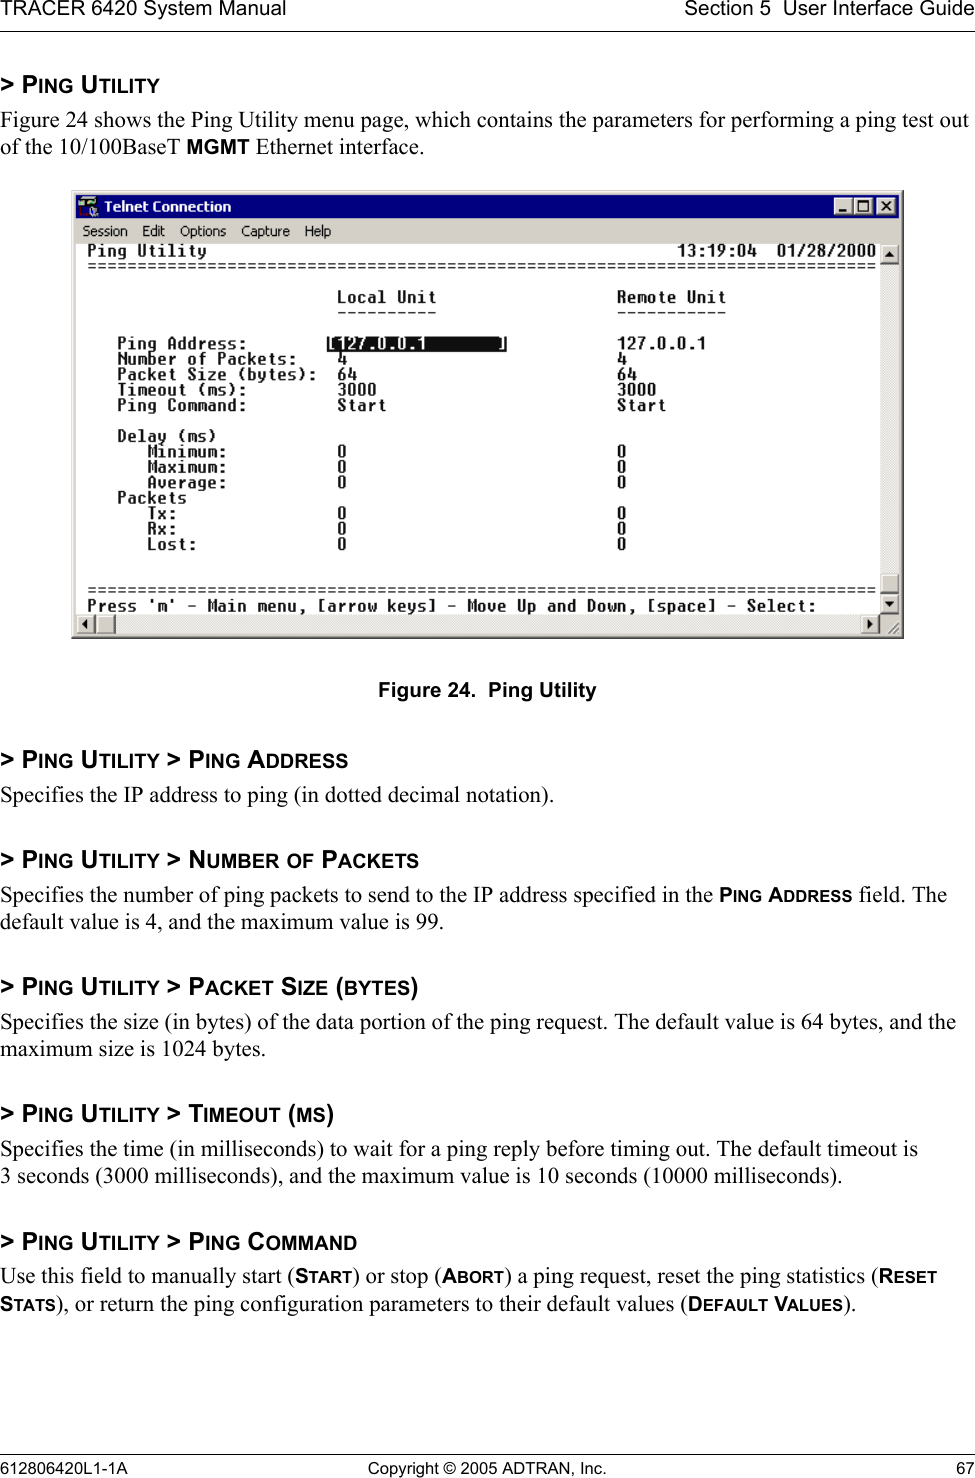 TRACER 6420 System Manual Section 5  User Interface Guide612806420L1-1A Copyright © 2005 ADTRAN, Inc. 67&gt; PING UTILITYFigure 24 shows the Ping Utility menu page, which contains the parameters for performing a ping test out of the 10/100BaseT MGMT Ethernet interface. Figure 24.  Ping Utility&gt; PING UTILITY &gt; PING ADDRESSSpecifies the IP address to ping (in dotted decimal notation).&gt; PING UTILITY &gt; NUMBER OF PACKETSSpecifies the number of ping packets to send to the IP address specified in the PING ADDRESS field. The default value is 4, and the maximum value is 99.&gt; PING UTILITY &gt; PACKET SIZE (BYTES)Specifies the size (in bytes) of the data portion of the ping request. The default value is 64 bytes, and the maximum size is 1024 bytes.&gt; PING UTILITY &gt; TIMEOUT (MS)Specifies the time (in milliseconds) to wait for a ping reply before timing out. The default timeout is 3 seconds (3000 milliseconds), and the maximum value is 10 seconds (10000 milliseconds).&gt; PING UTILITY &gt; PING COMMANDUse this field to manually start (START) or stop (ABORT) a ping request, reset the ping statistics (RESET STATS), or return the ping configuration parameters to their default values (DEFAULT VALUES).